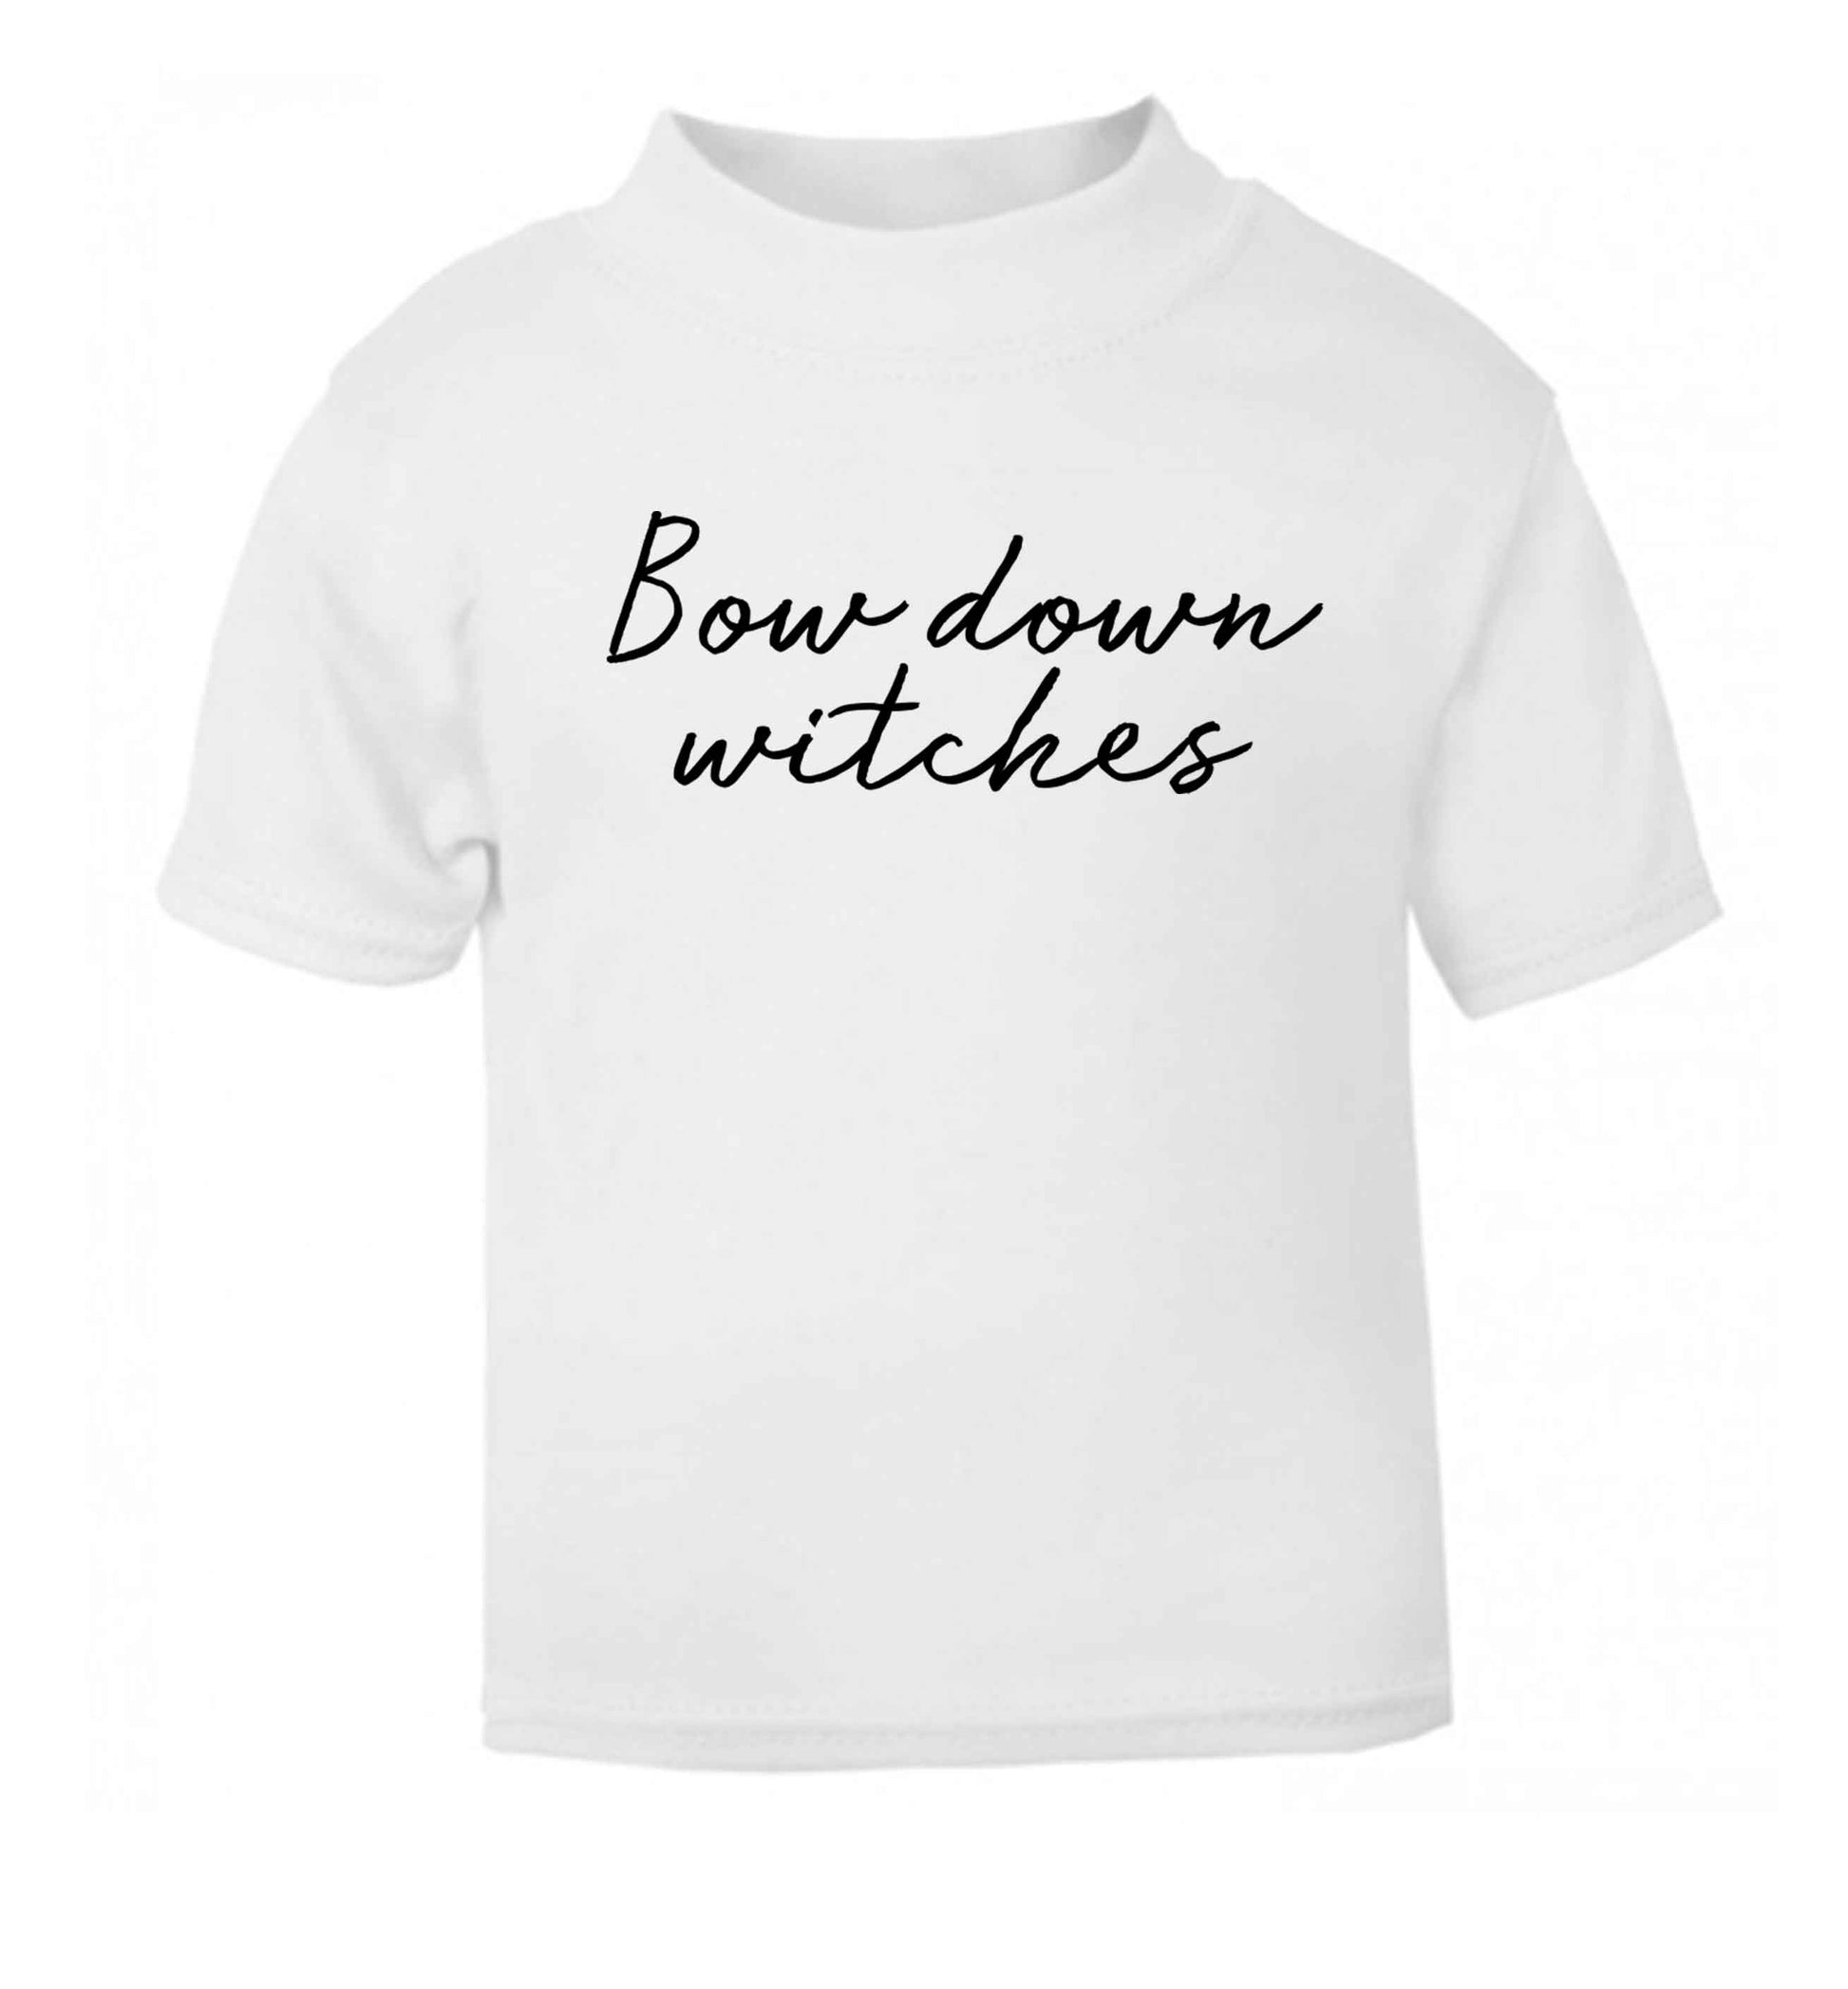 Bow down witches white baby toddler Tshirt 2 Years